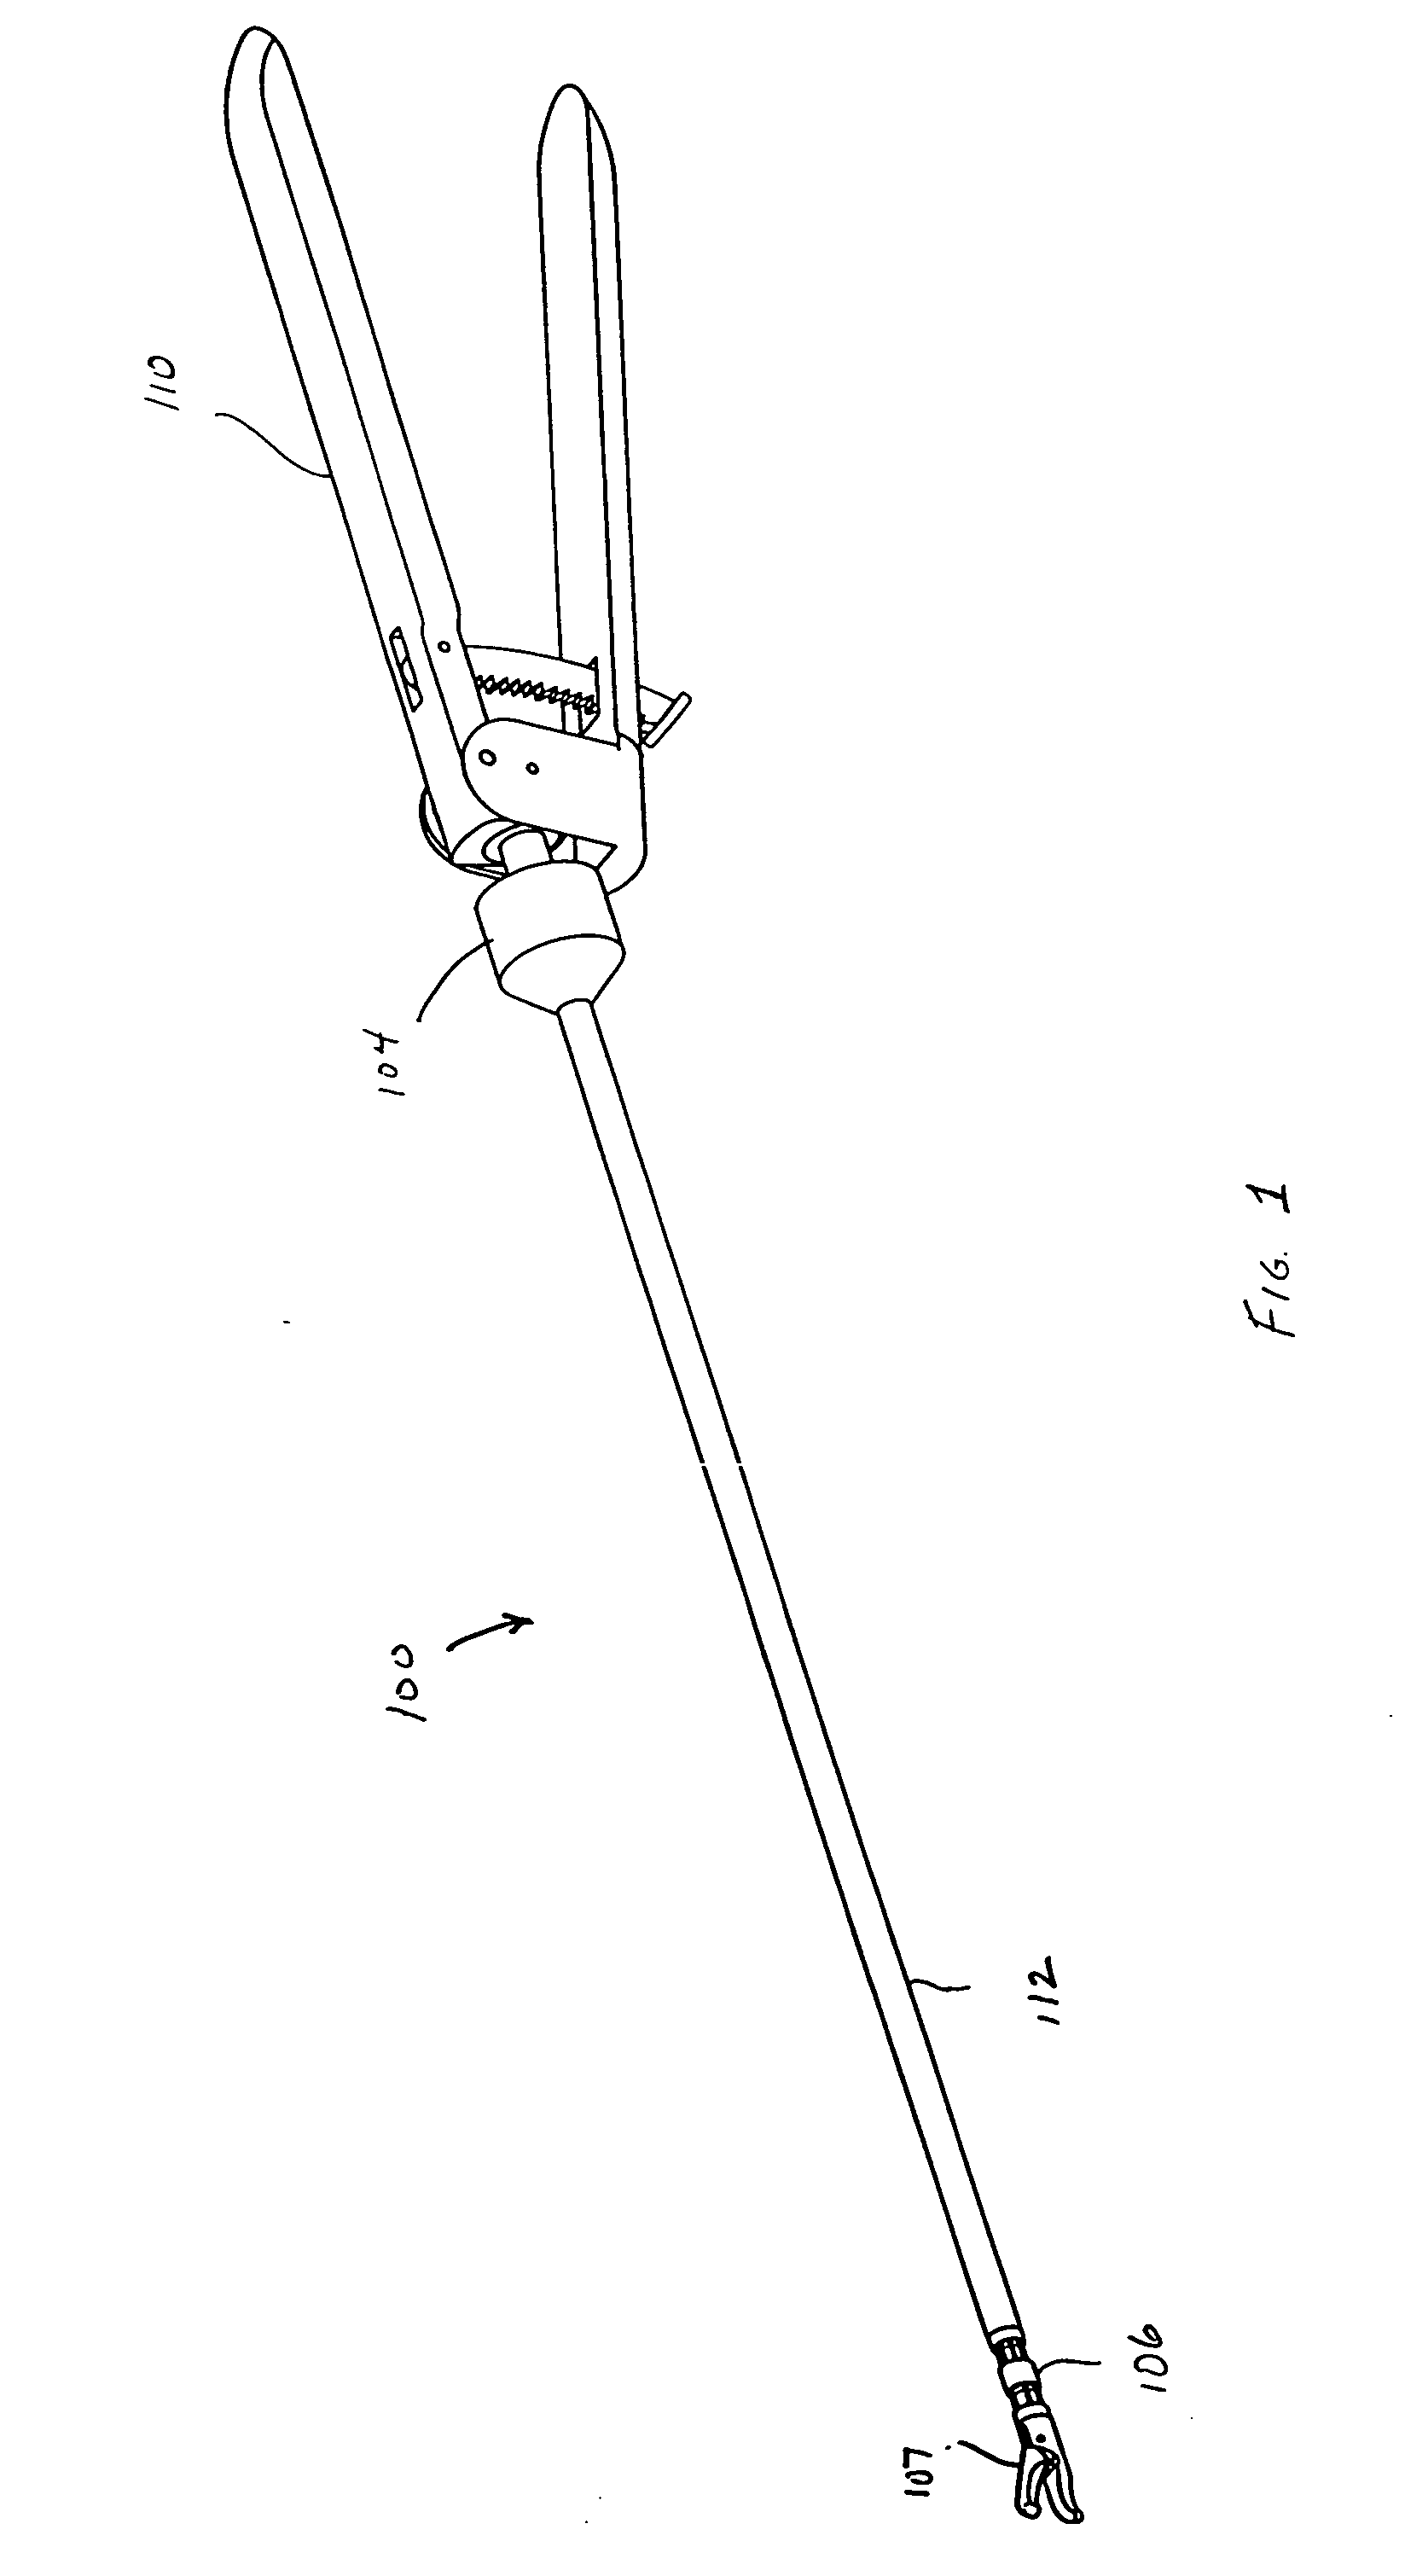 Articulating mechanisms with joint assembly and manual handle for remote manipulation of instruments and tools